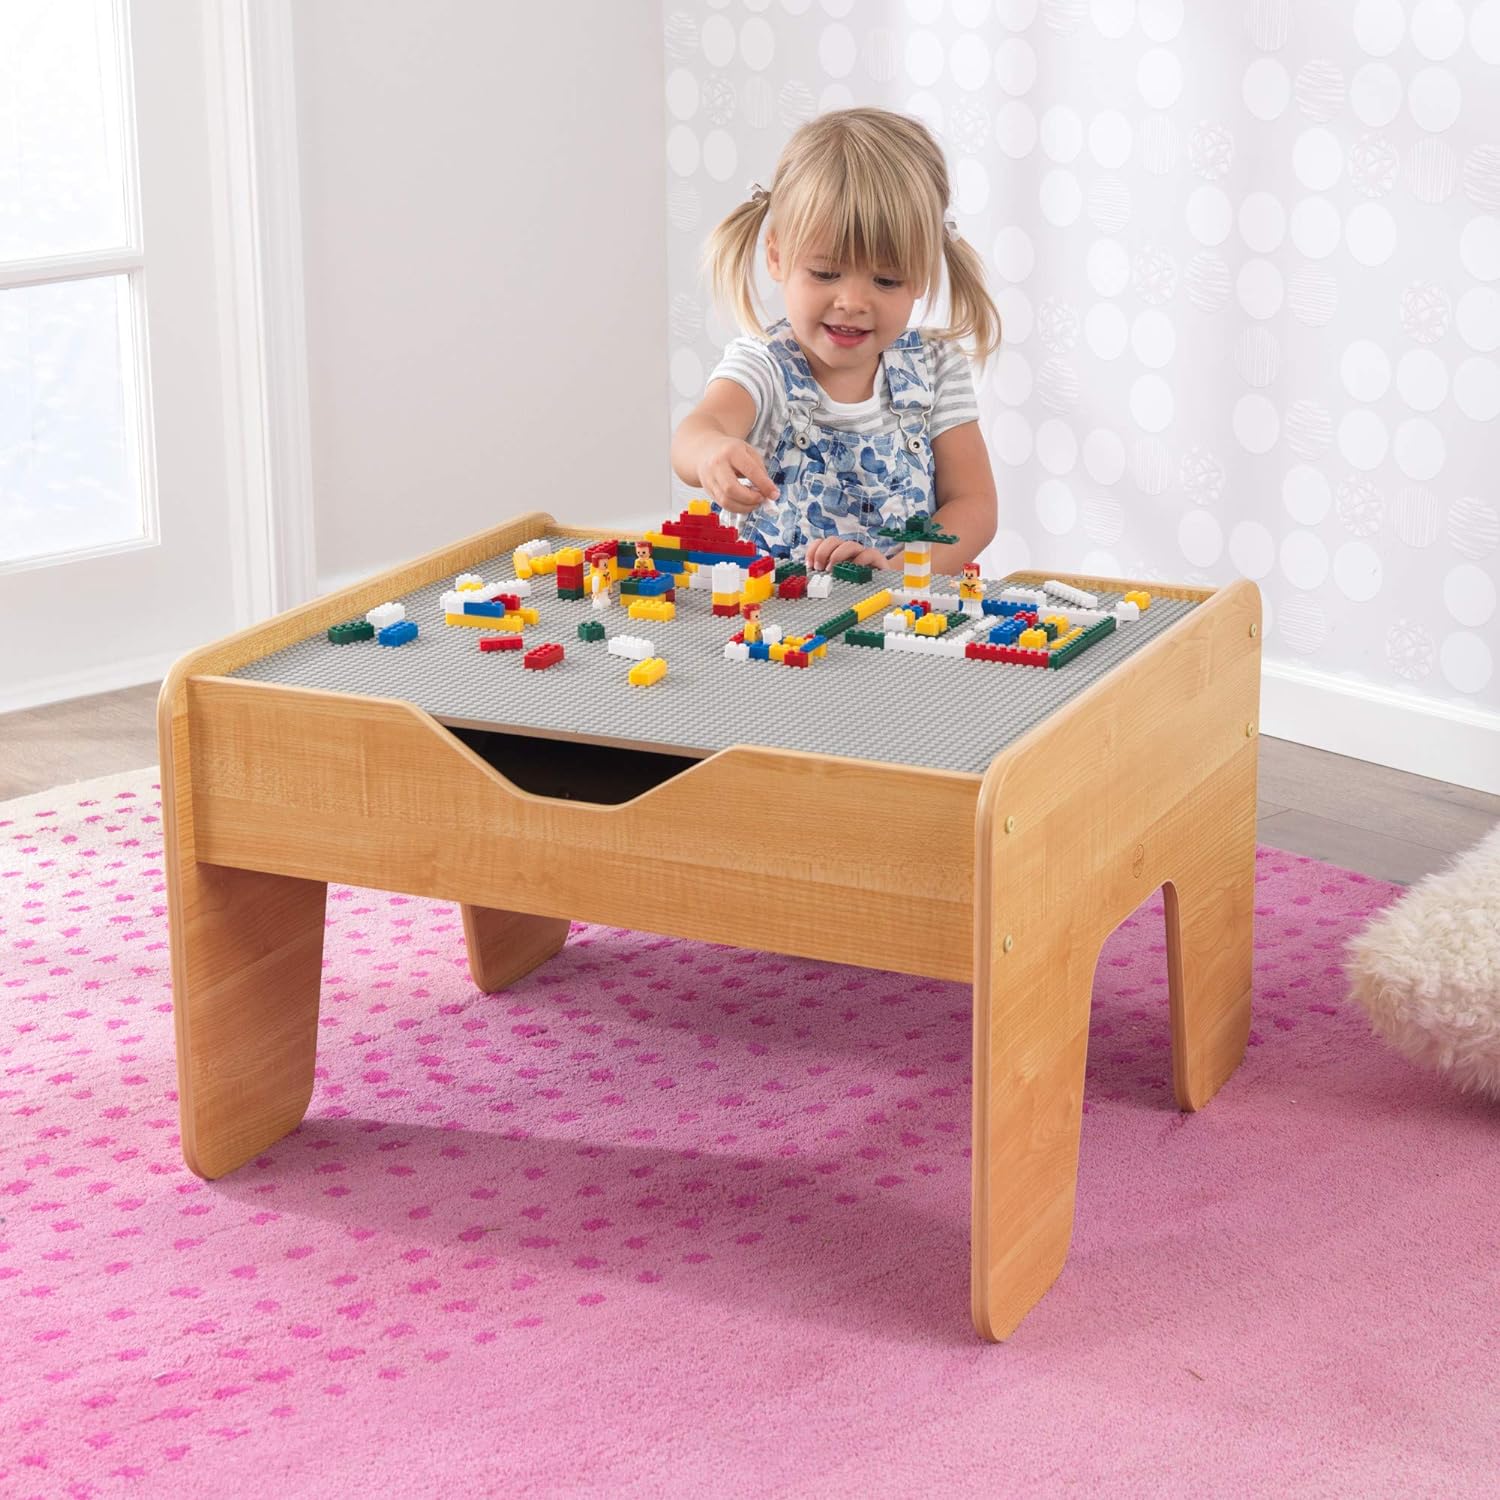 KidKraft Reversible Wooden Activity Table with Board